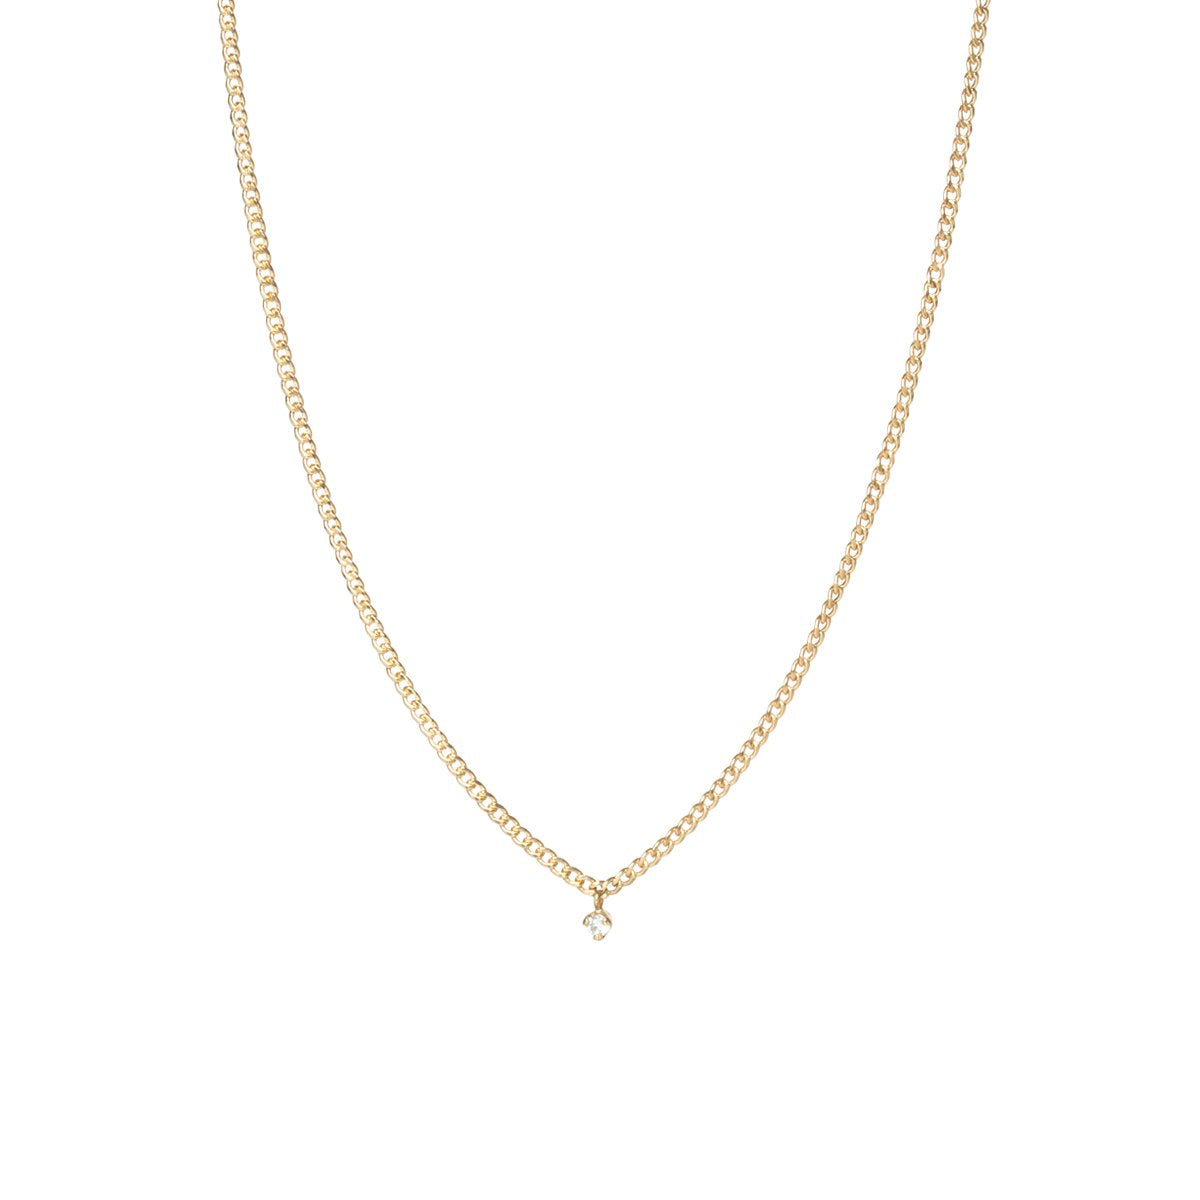 14K Yellow Gold Curb Link Diamond Necklace